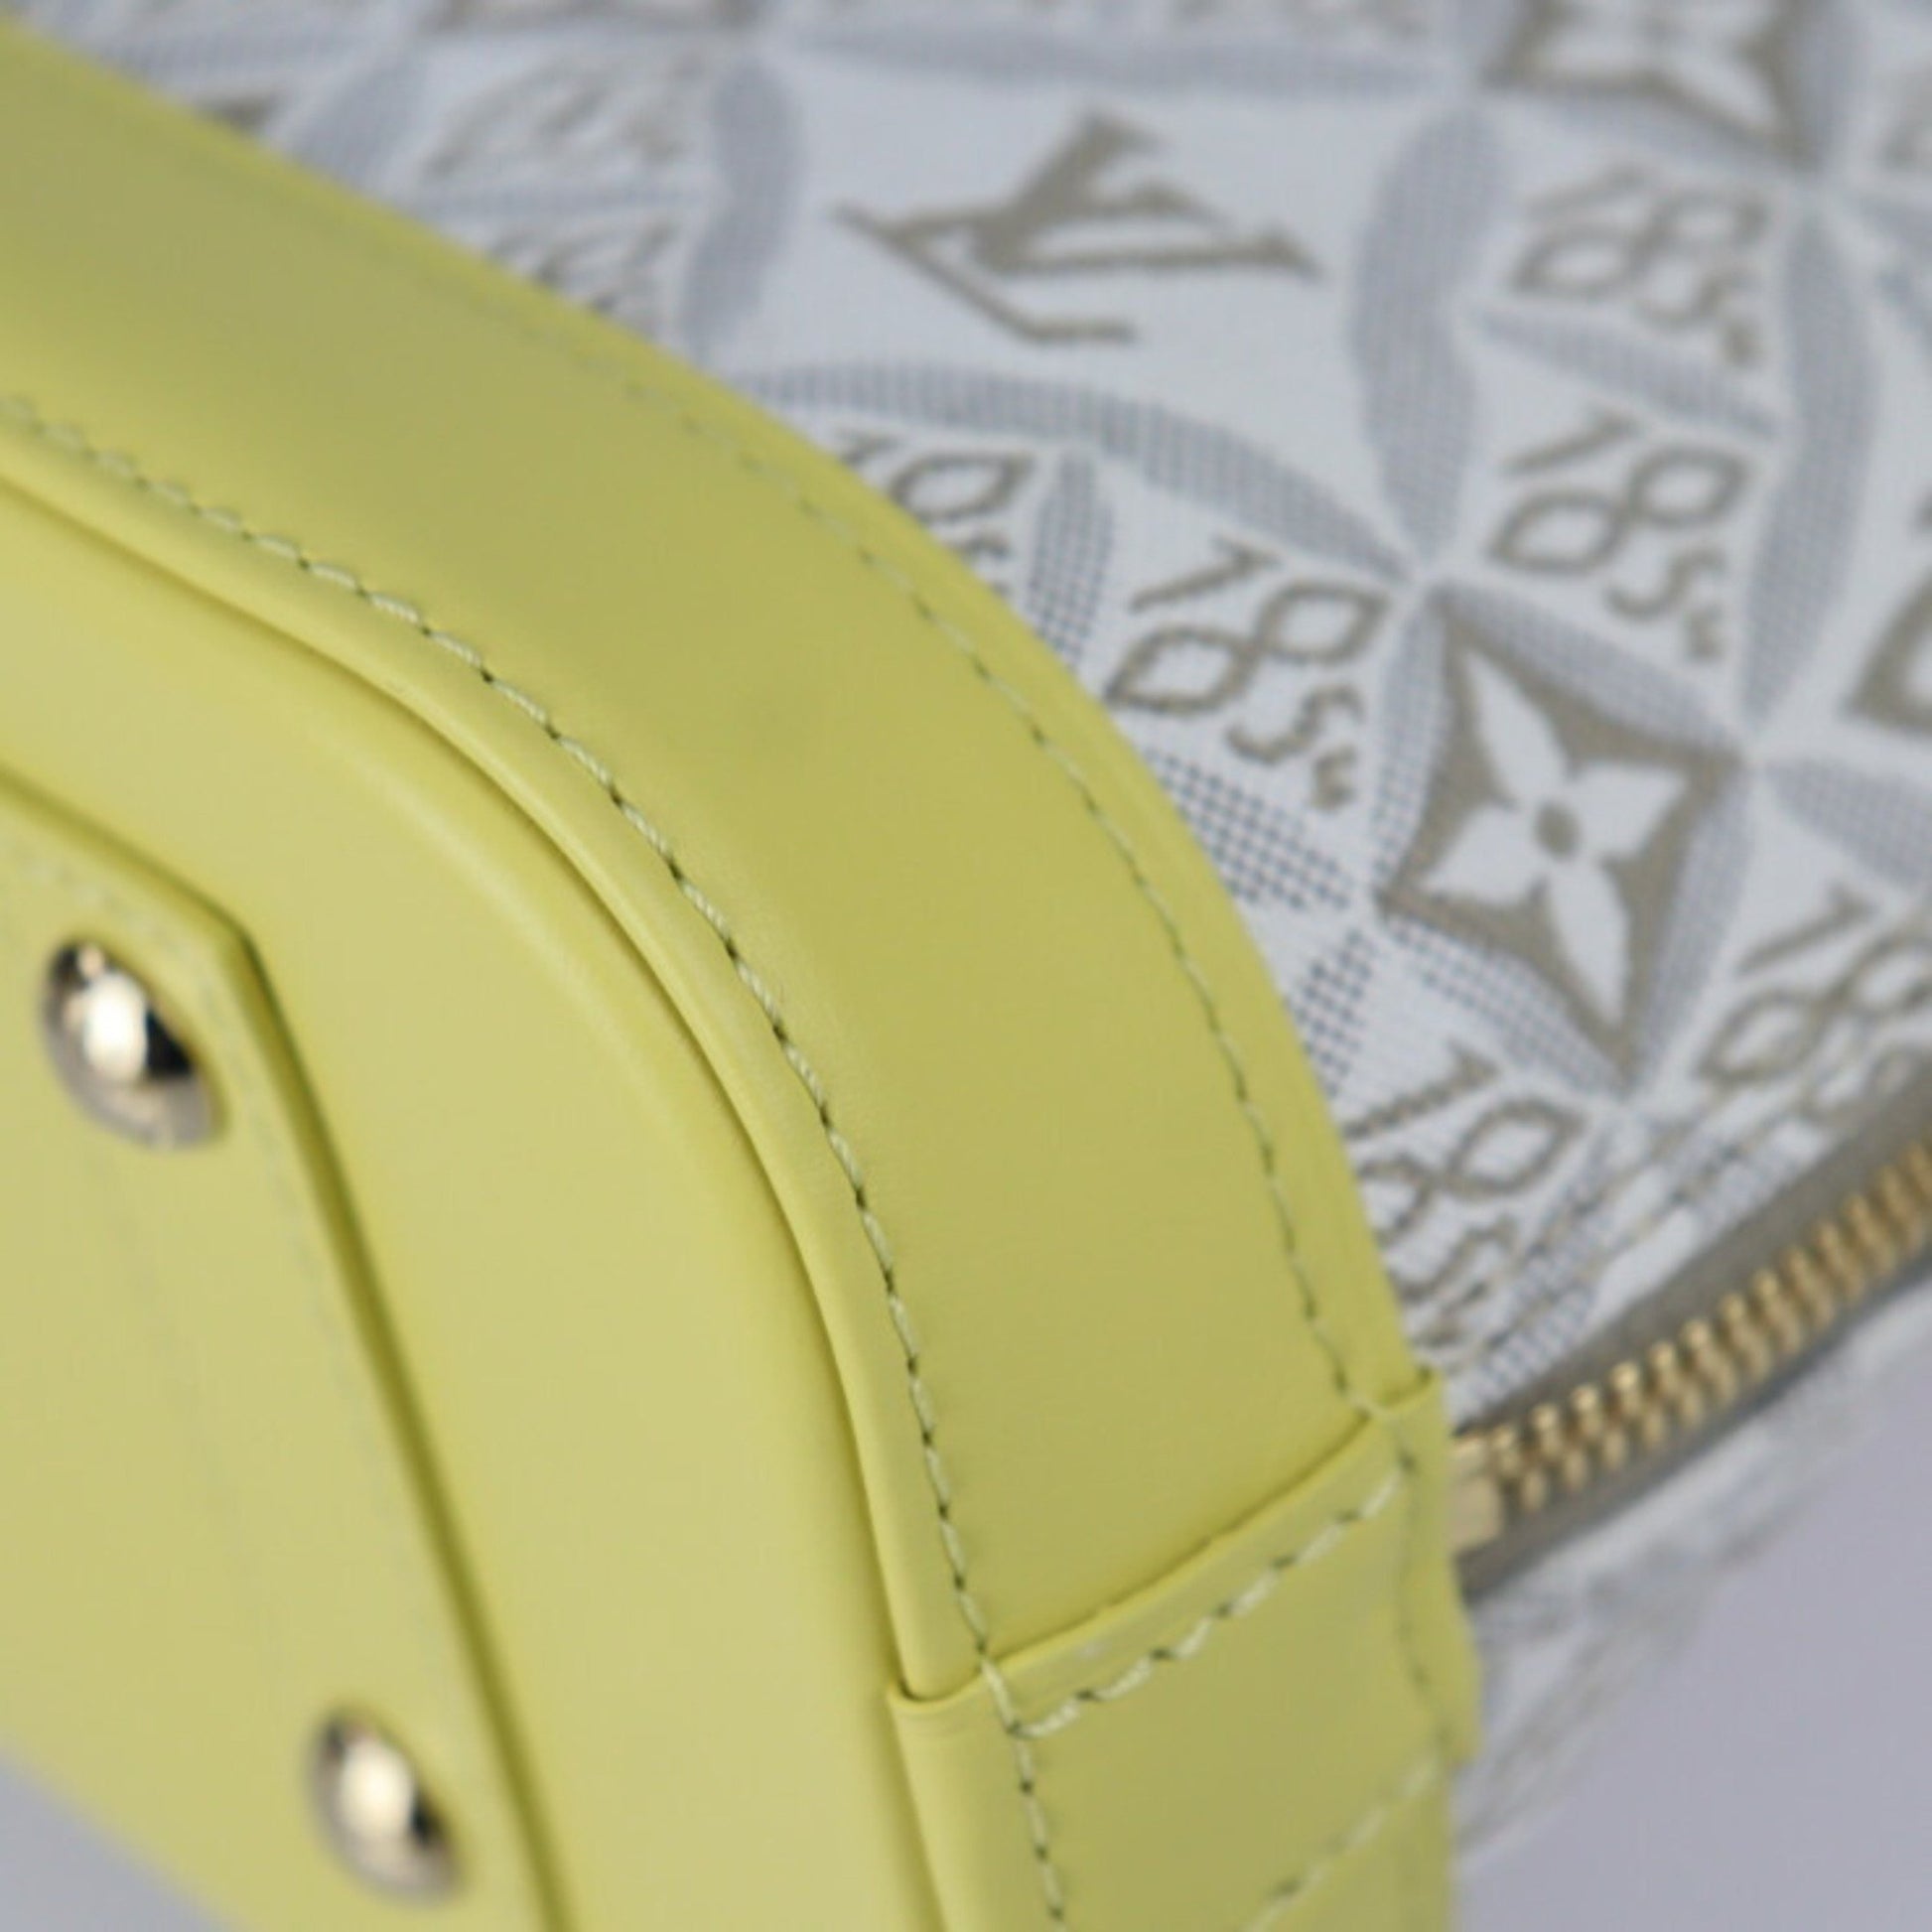 Louis Vuitton Alma BB Since 1854 Jacquard Ecru White/Yellow in  Canvas/Leather with Gold-tone - US